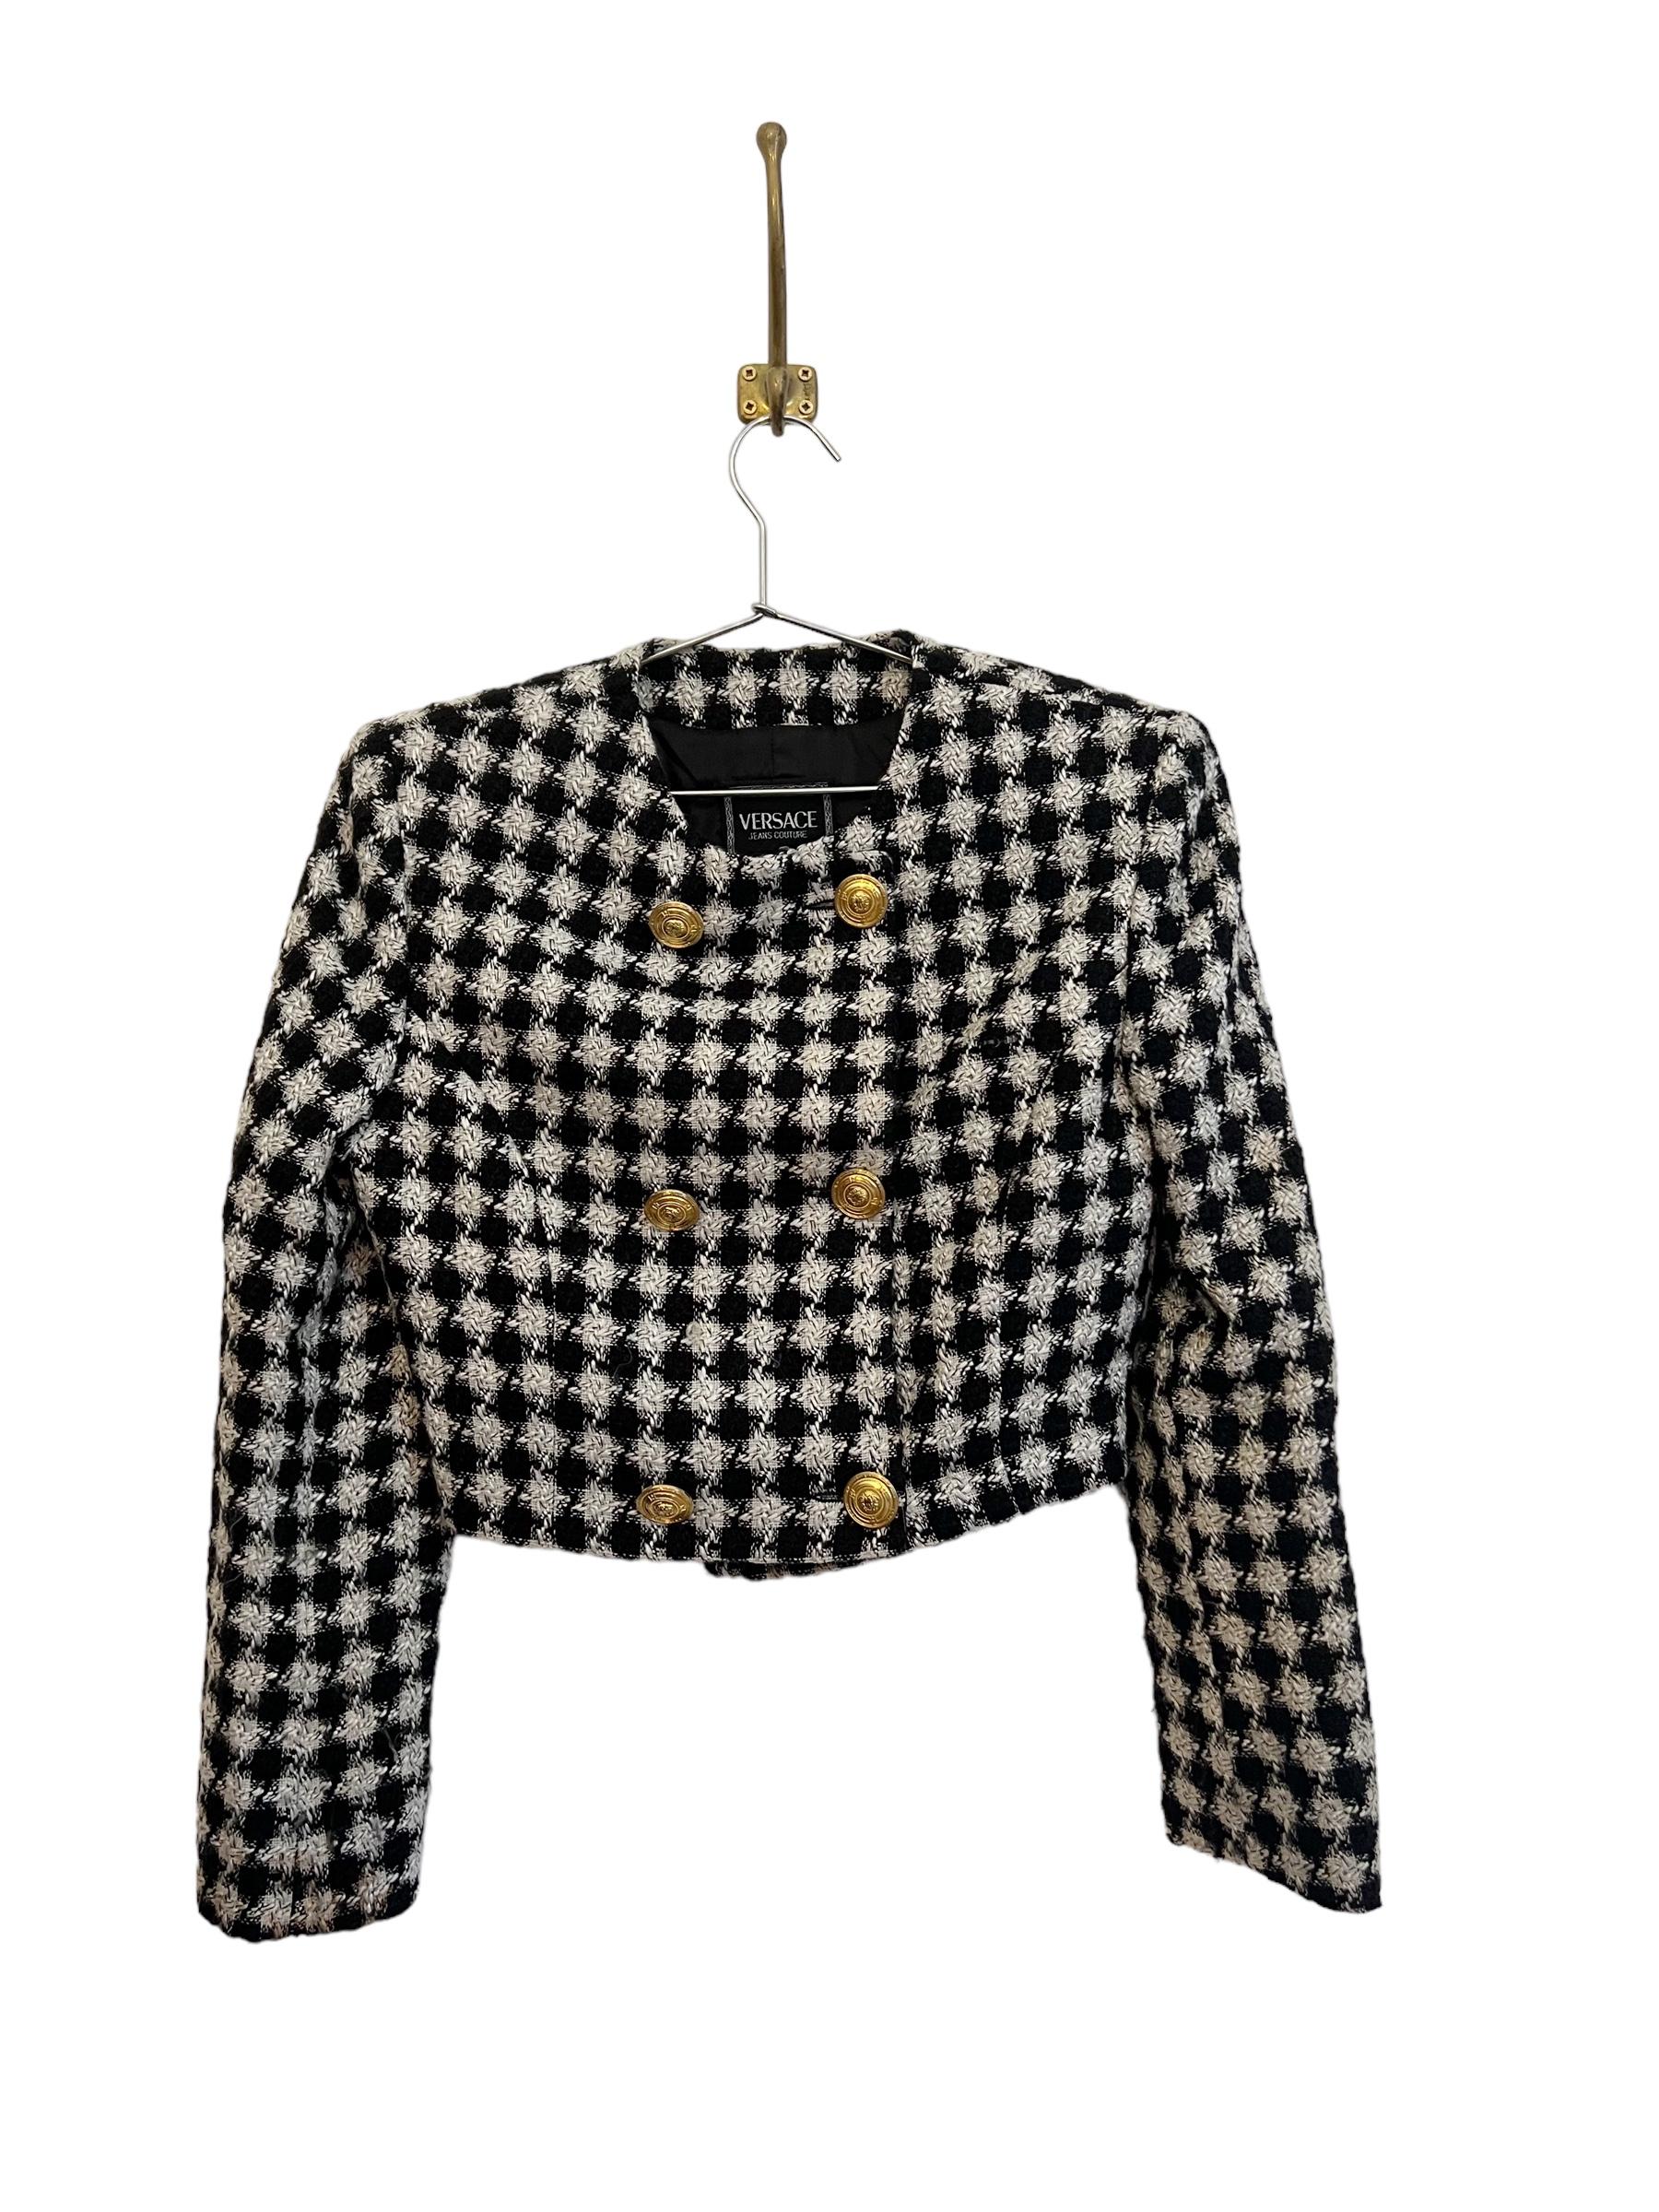 Chic Vintage early 1990's Versace Jeans Couture Matching shift Mini Dress and Cropped Tweed boucle jacket, in a houndstooth textured material with Gold metal hardware and iconic Medusa details.  

Jacket Features:  
Buttons down front 
Black fully